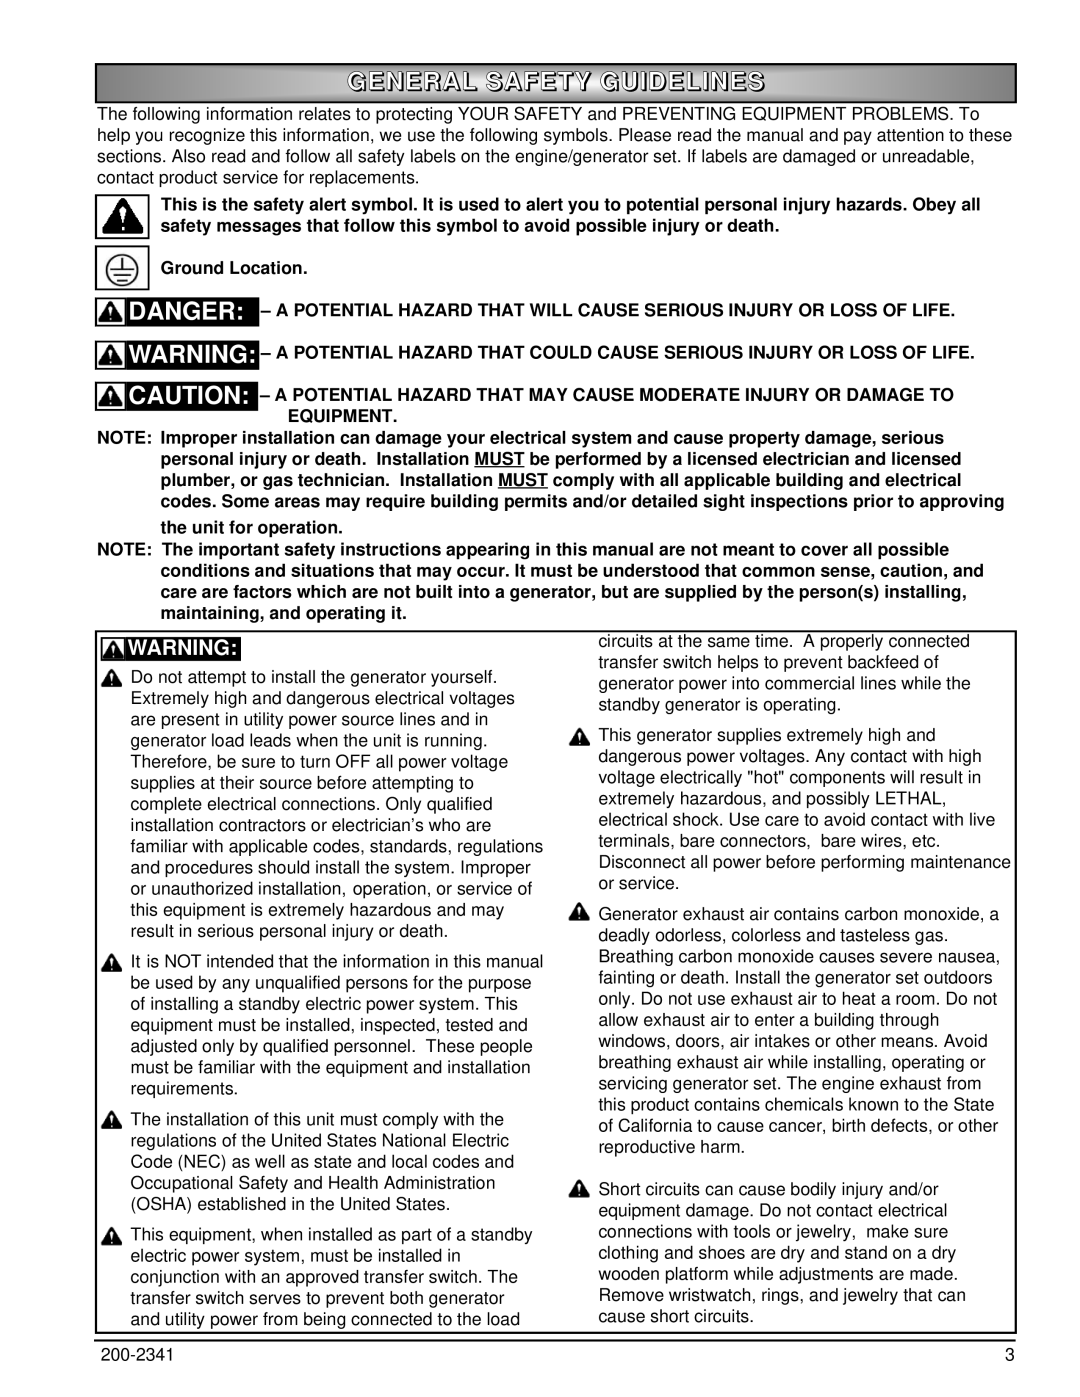 Powermate PM400911 owner manual General Safety Guidelines 